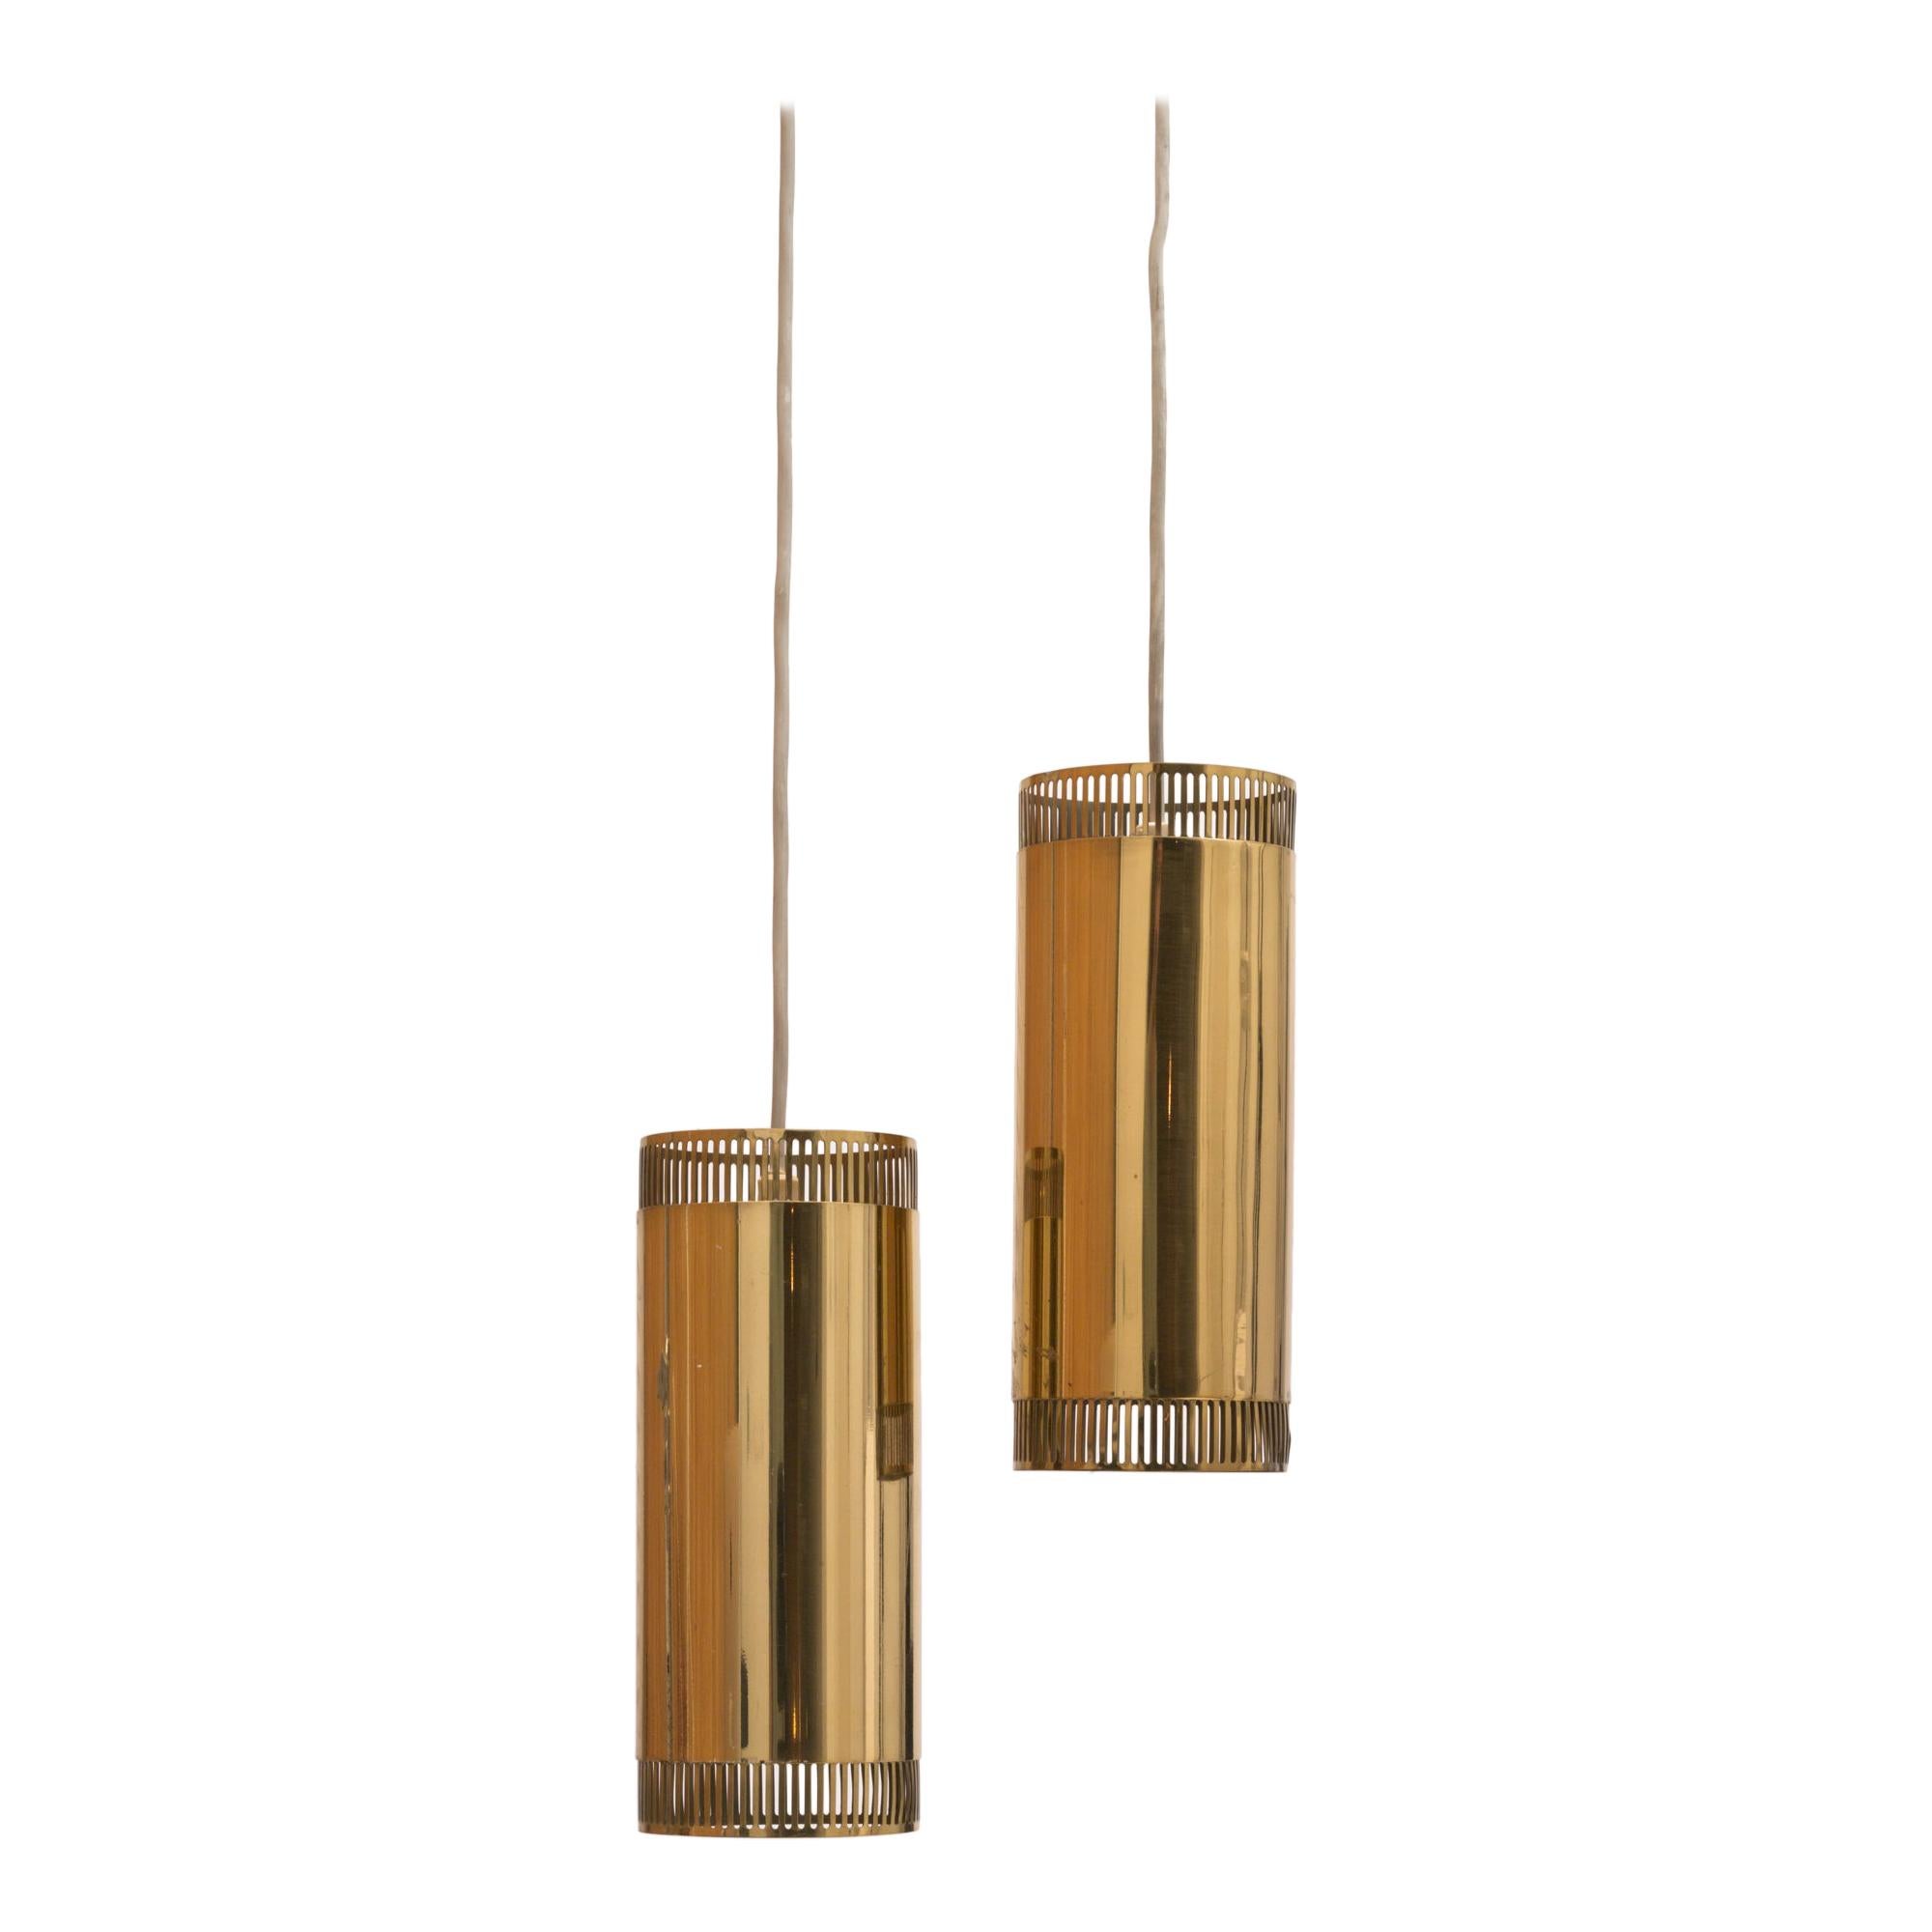 Pair of Solid Brass Pendant Lights by Boréns, Sweden, 1950s